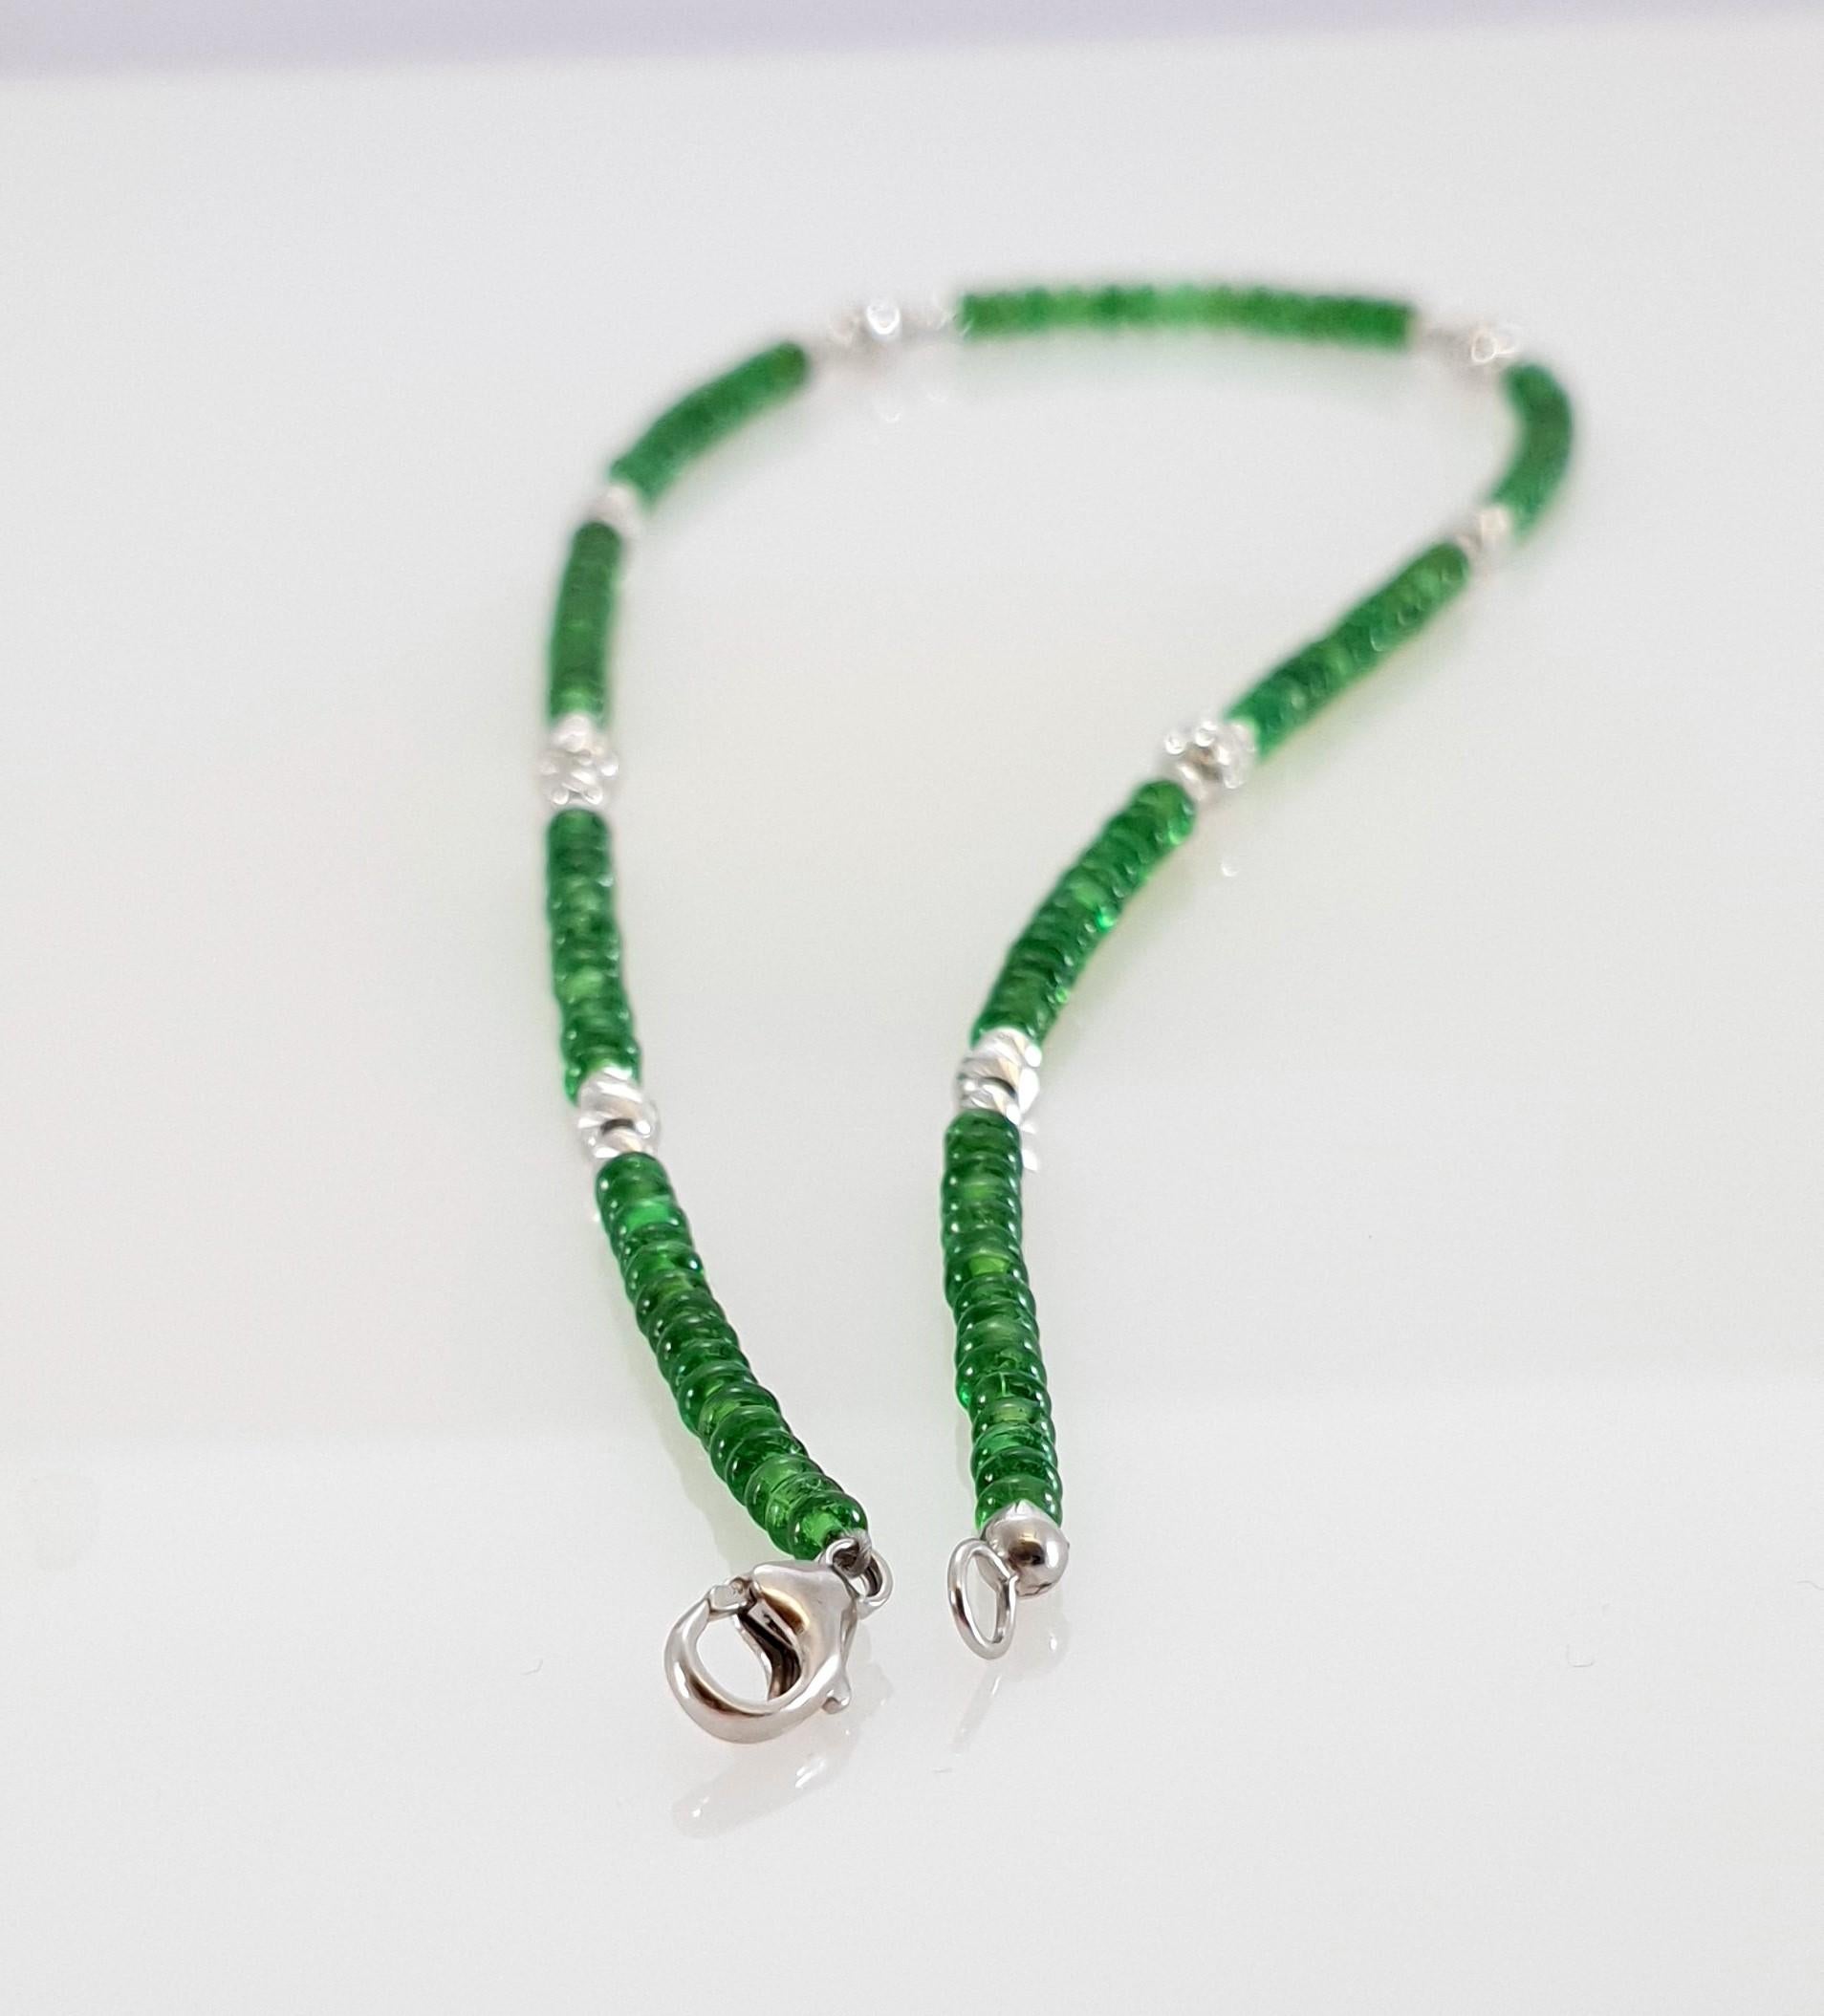 Bright Green Tsavorite Rondel Beaded Necklace with 18 Carat White Gold 2